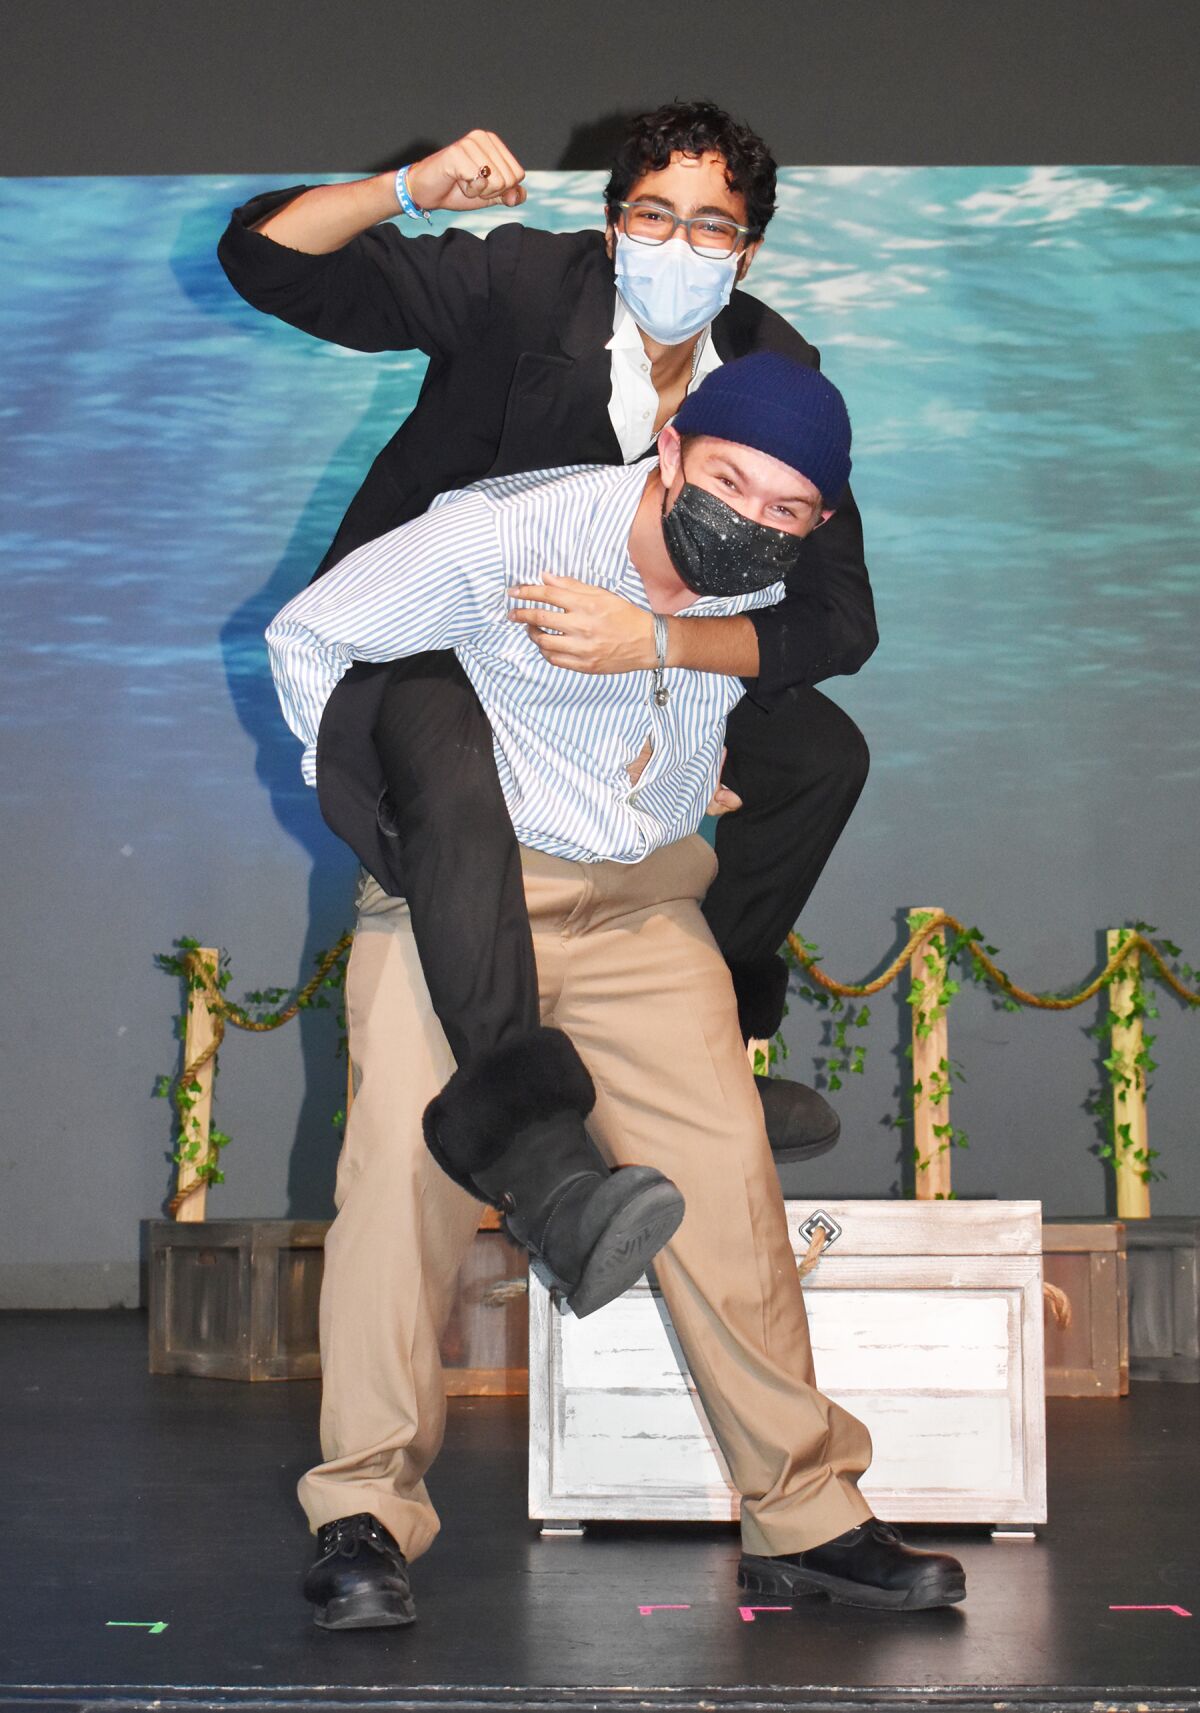 The pirate Black Stache (Andrew Obregon) being carried by Smee (Jack Boyce).